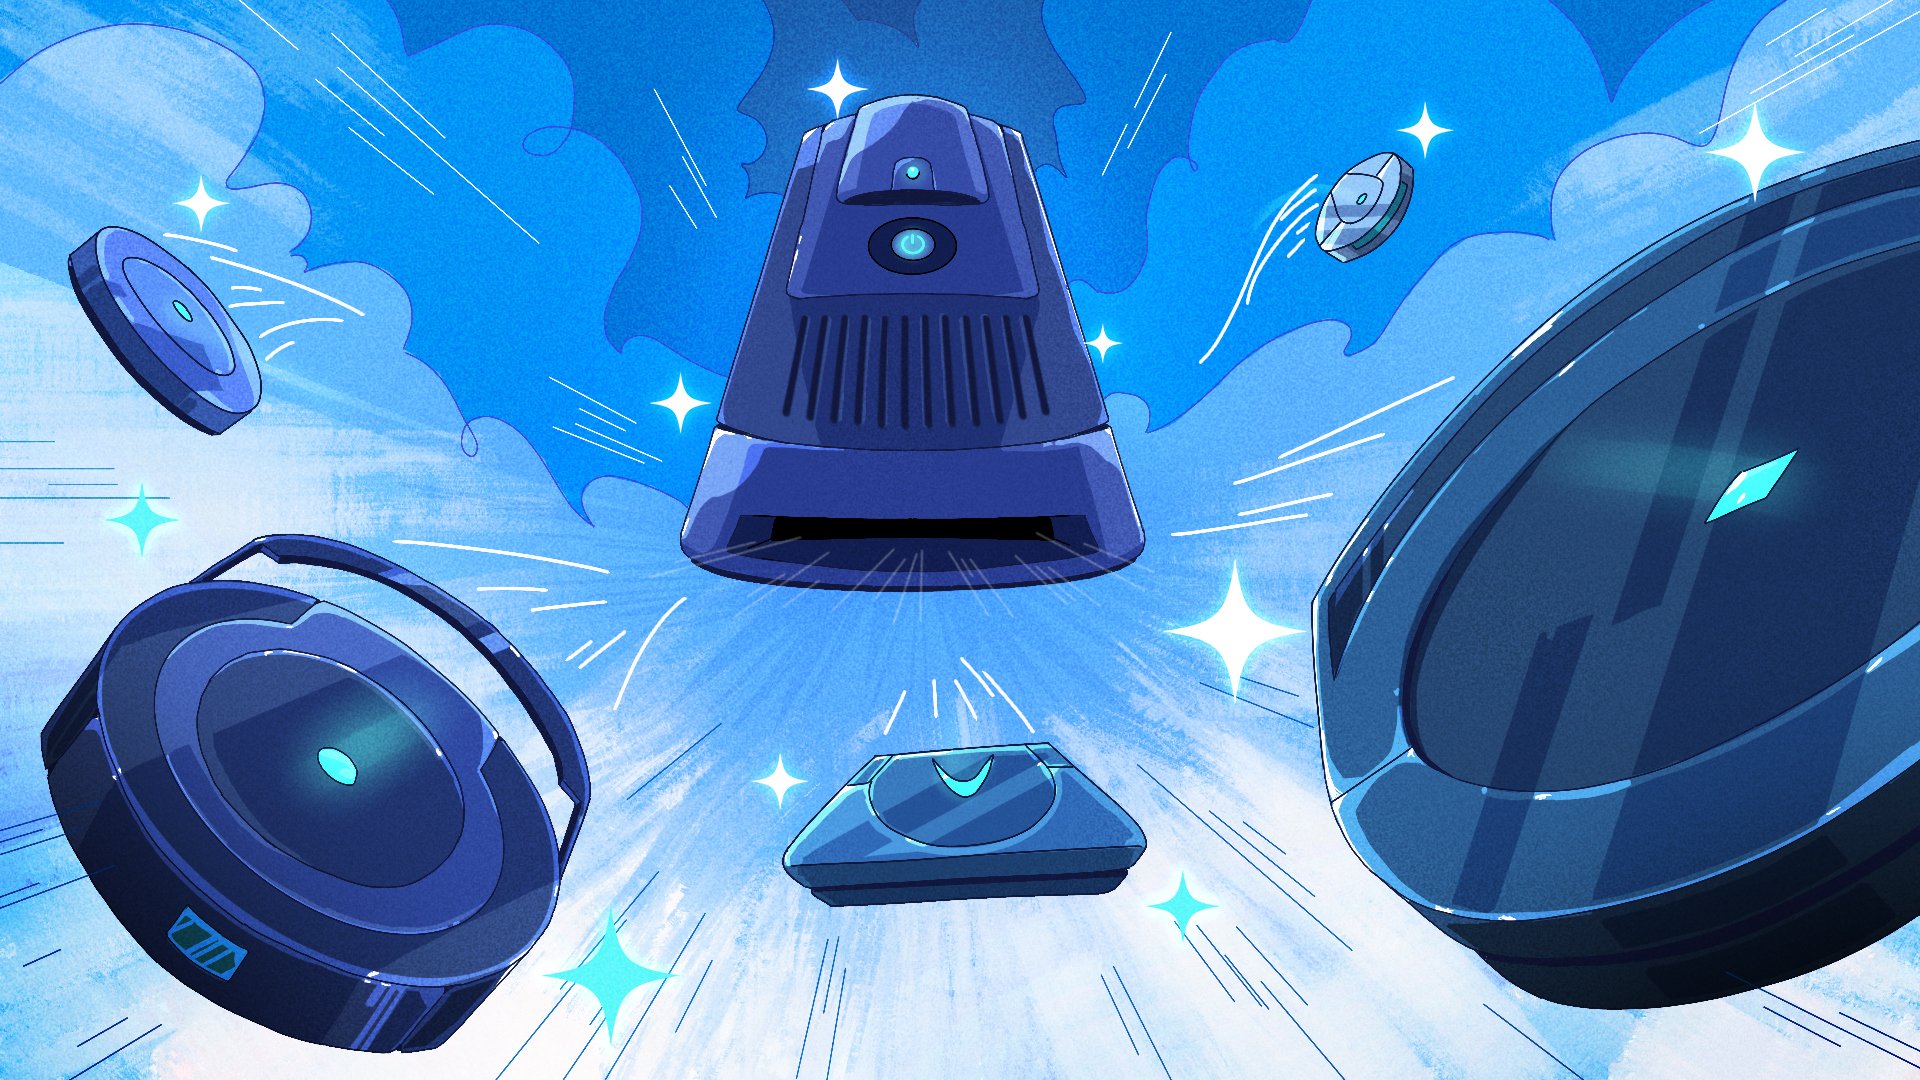 Blue-toned illustration featuring various robot vacuums flying out of large machine